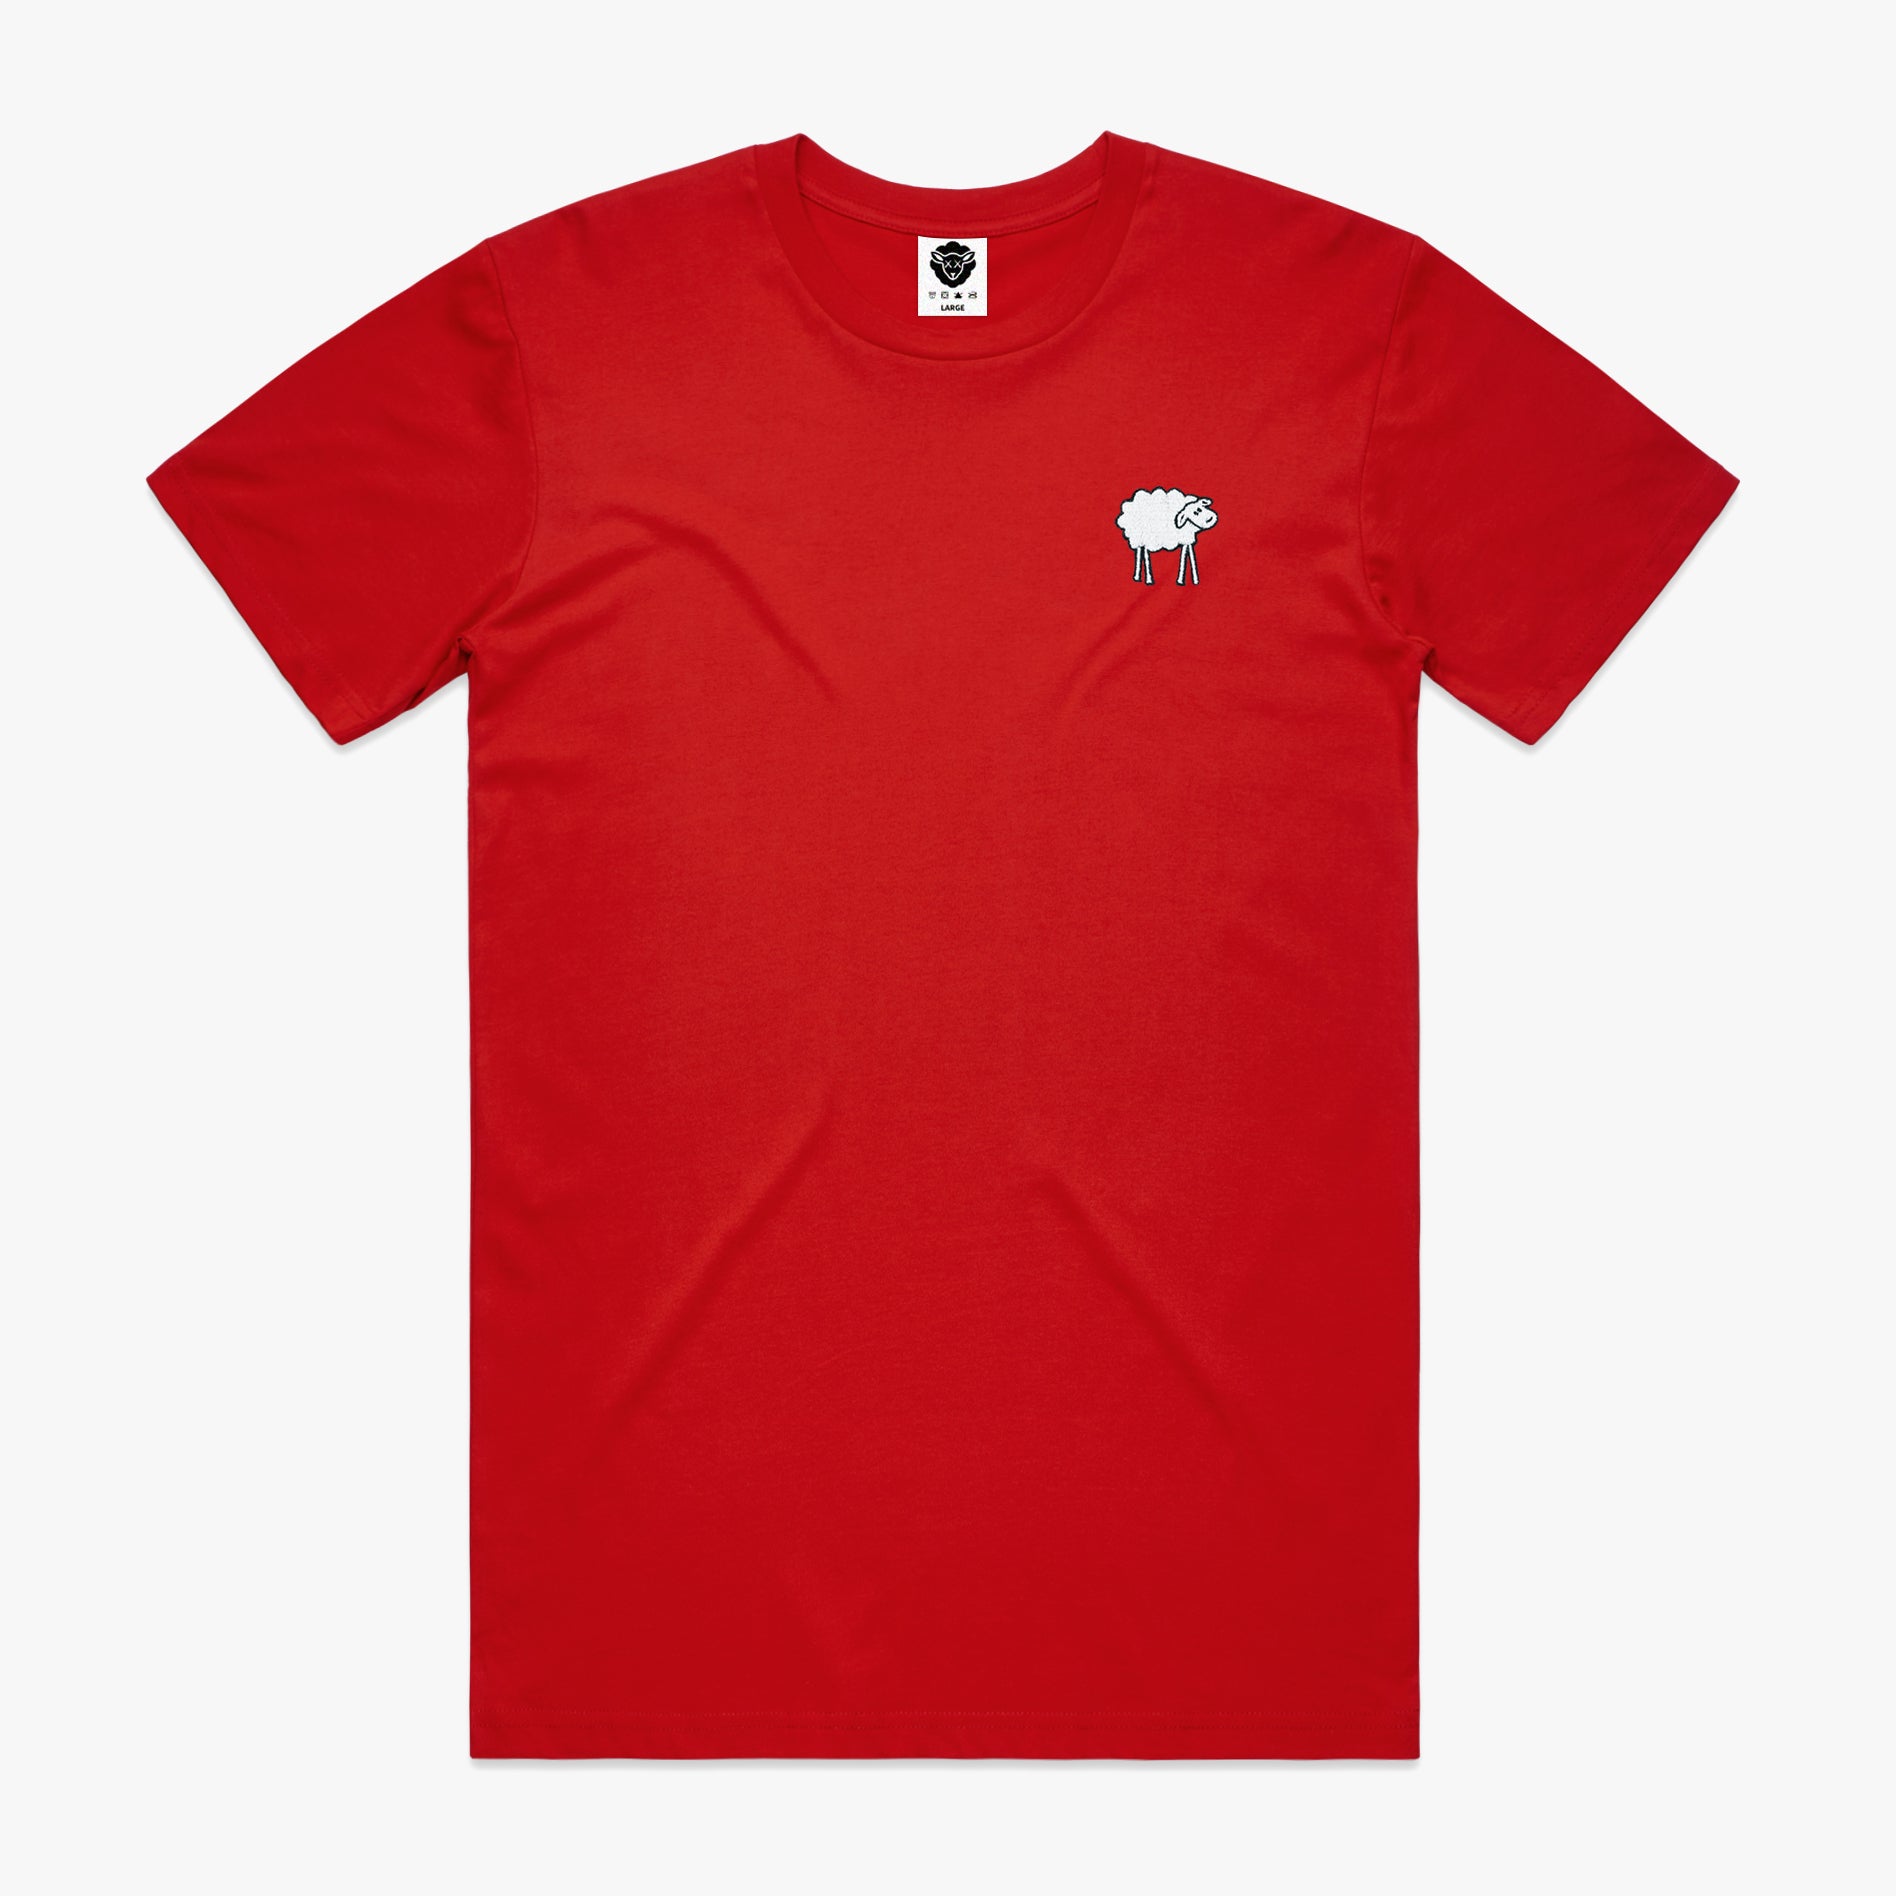 SHEEPEY OG Embroidered Tee Red